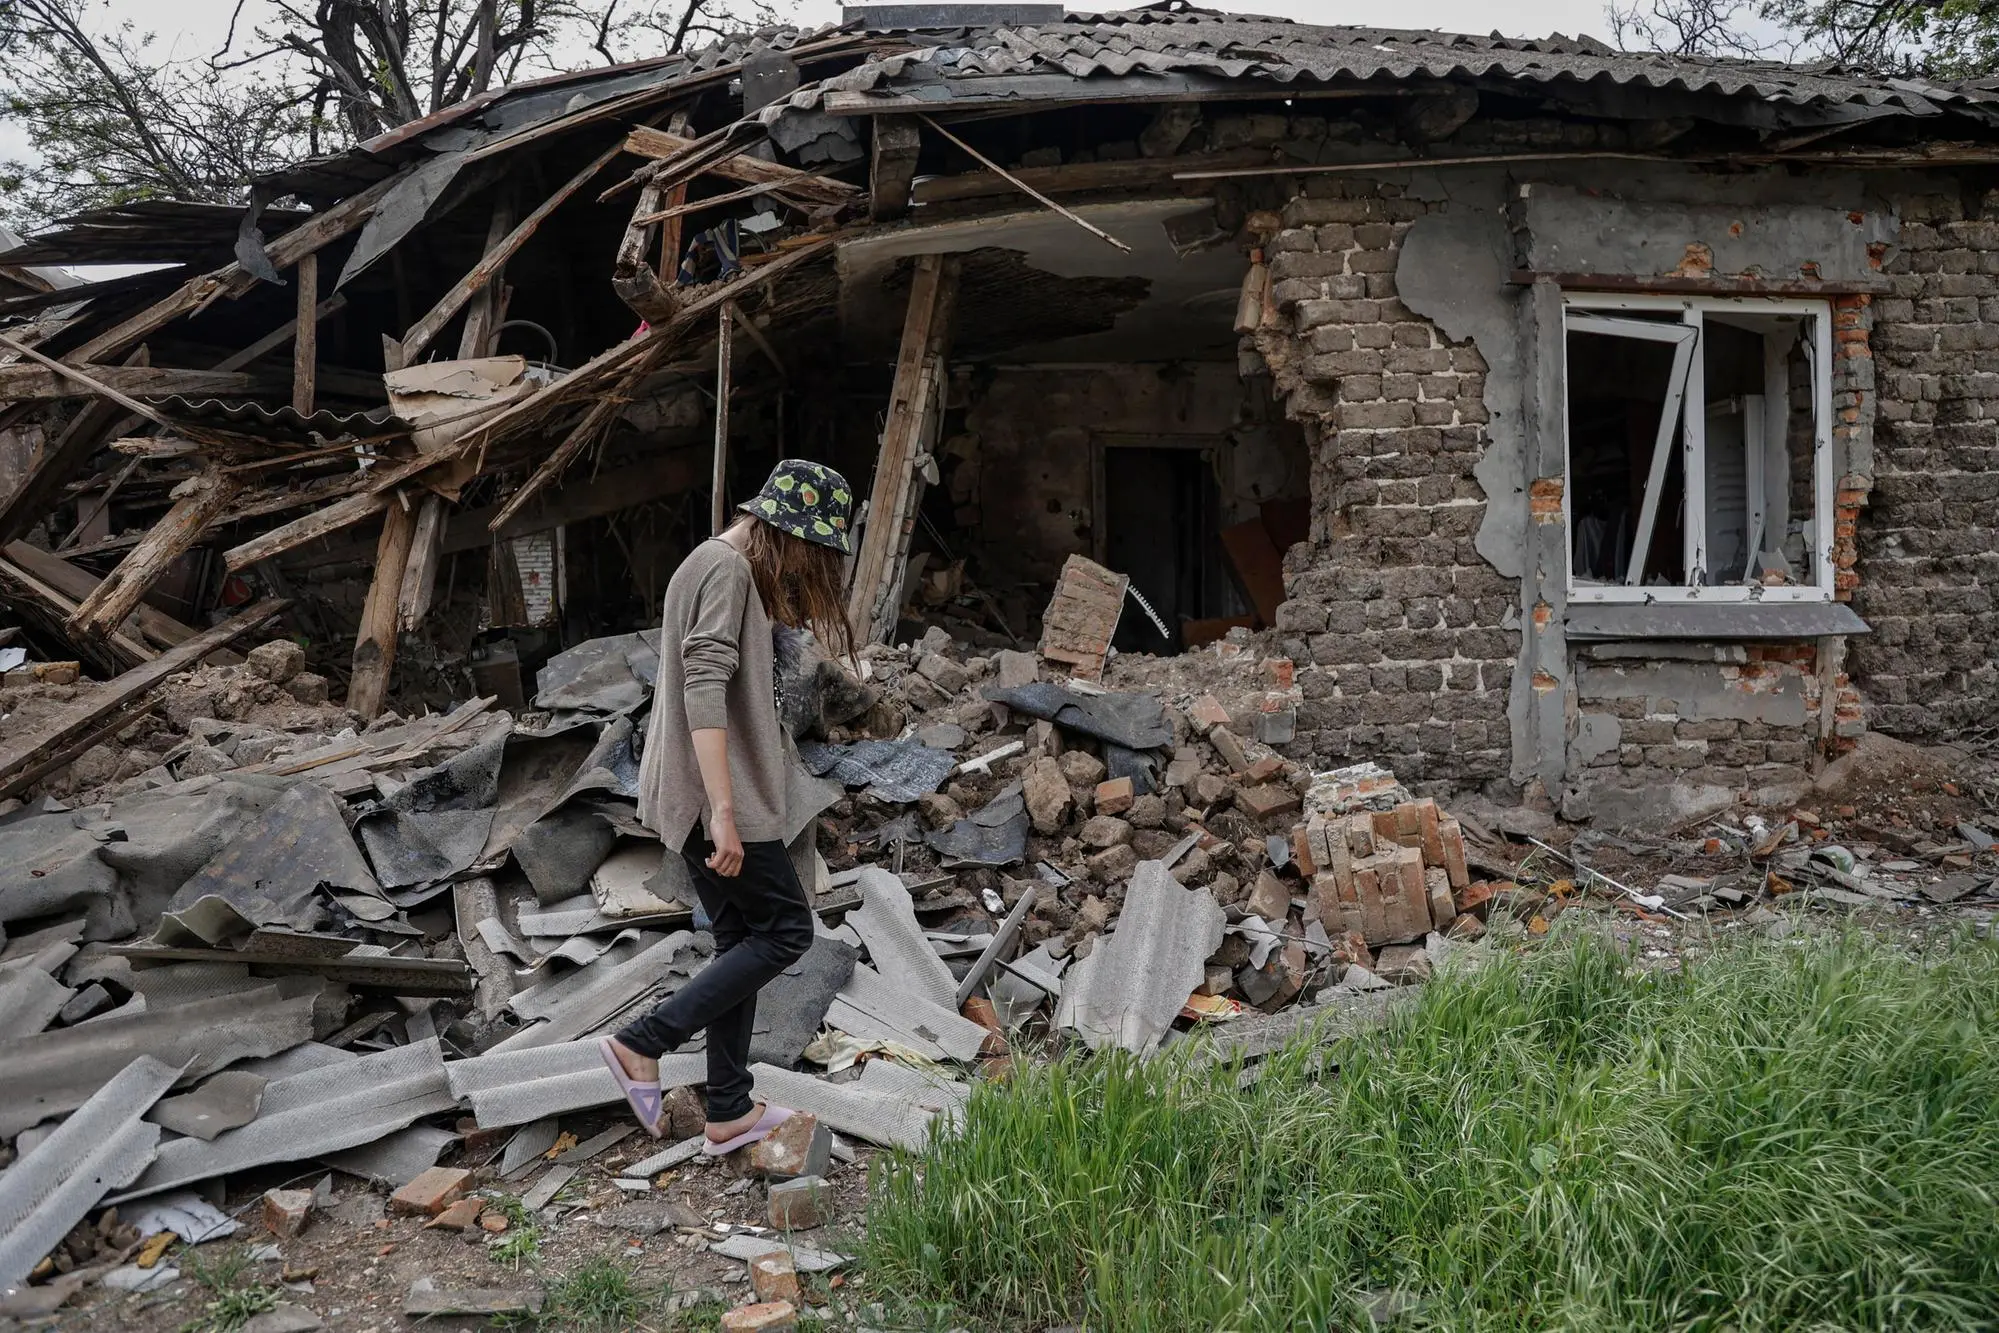 A house destroyed by bombs in Ukraine (Ansa)